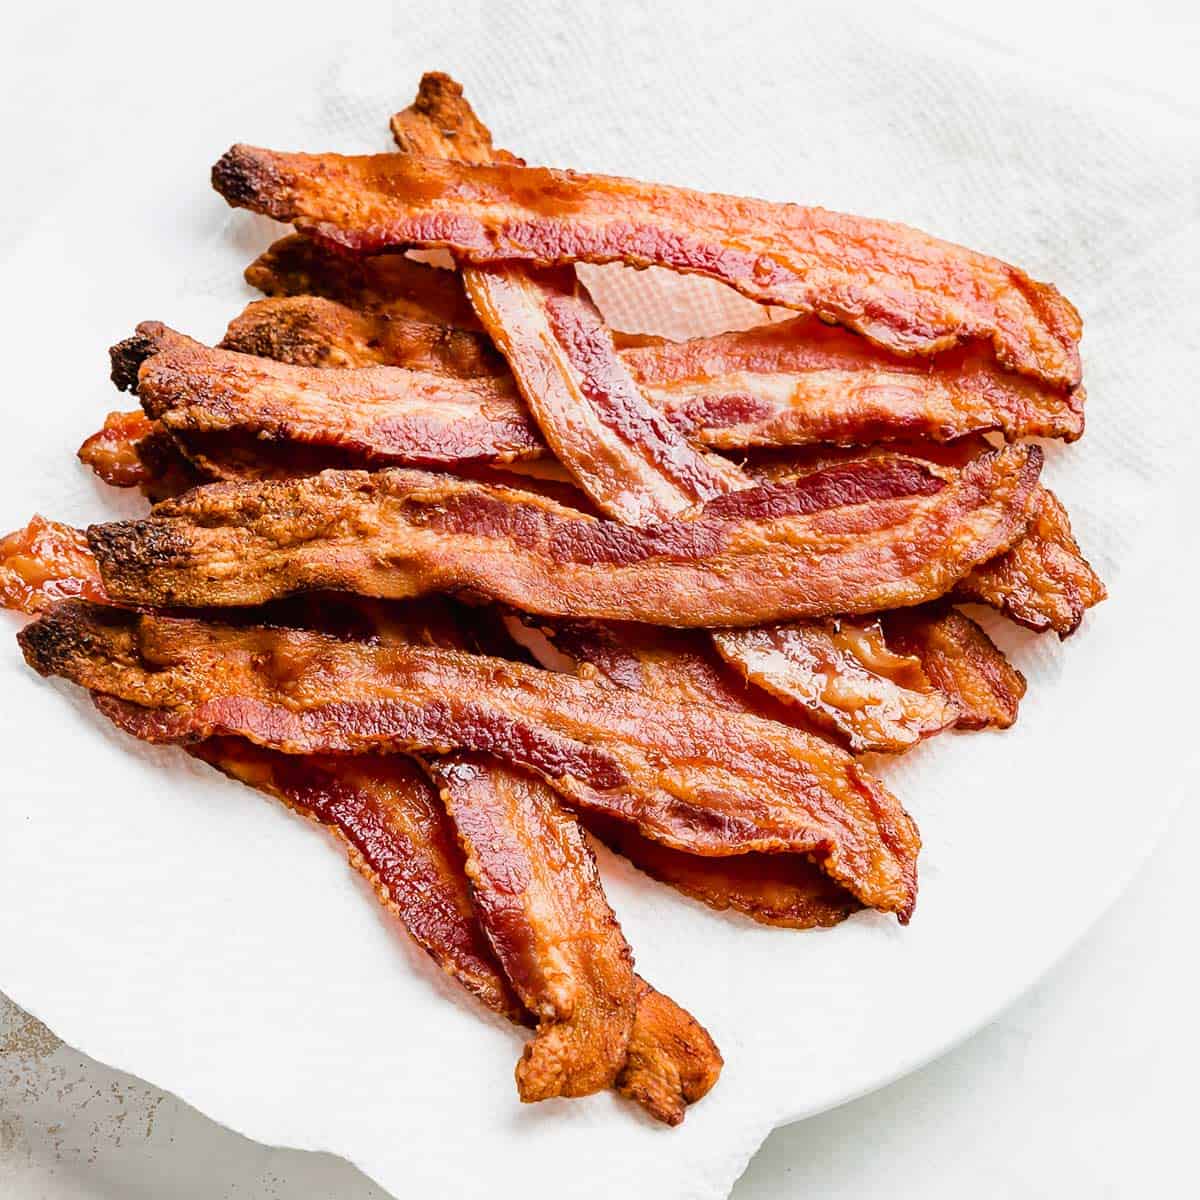 How To Cook Crispy Bacon In The Oven